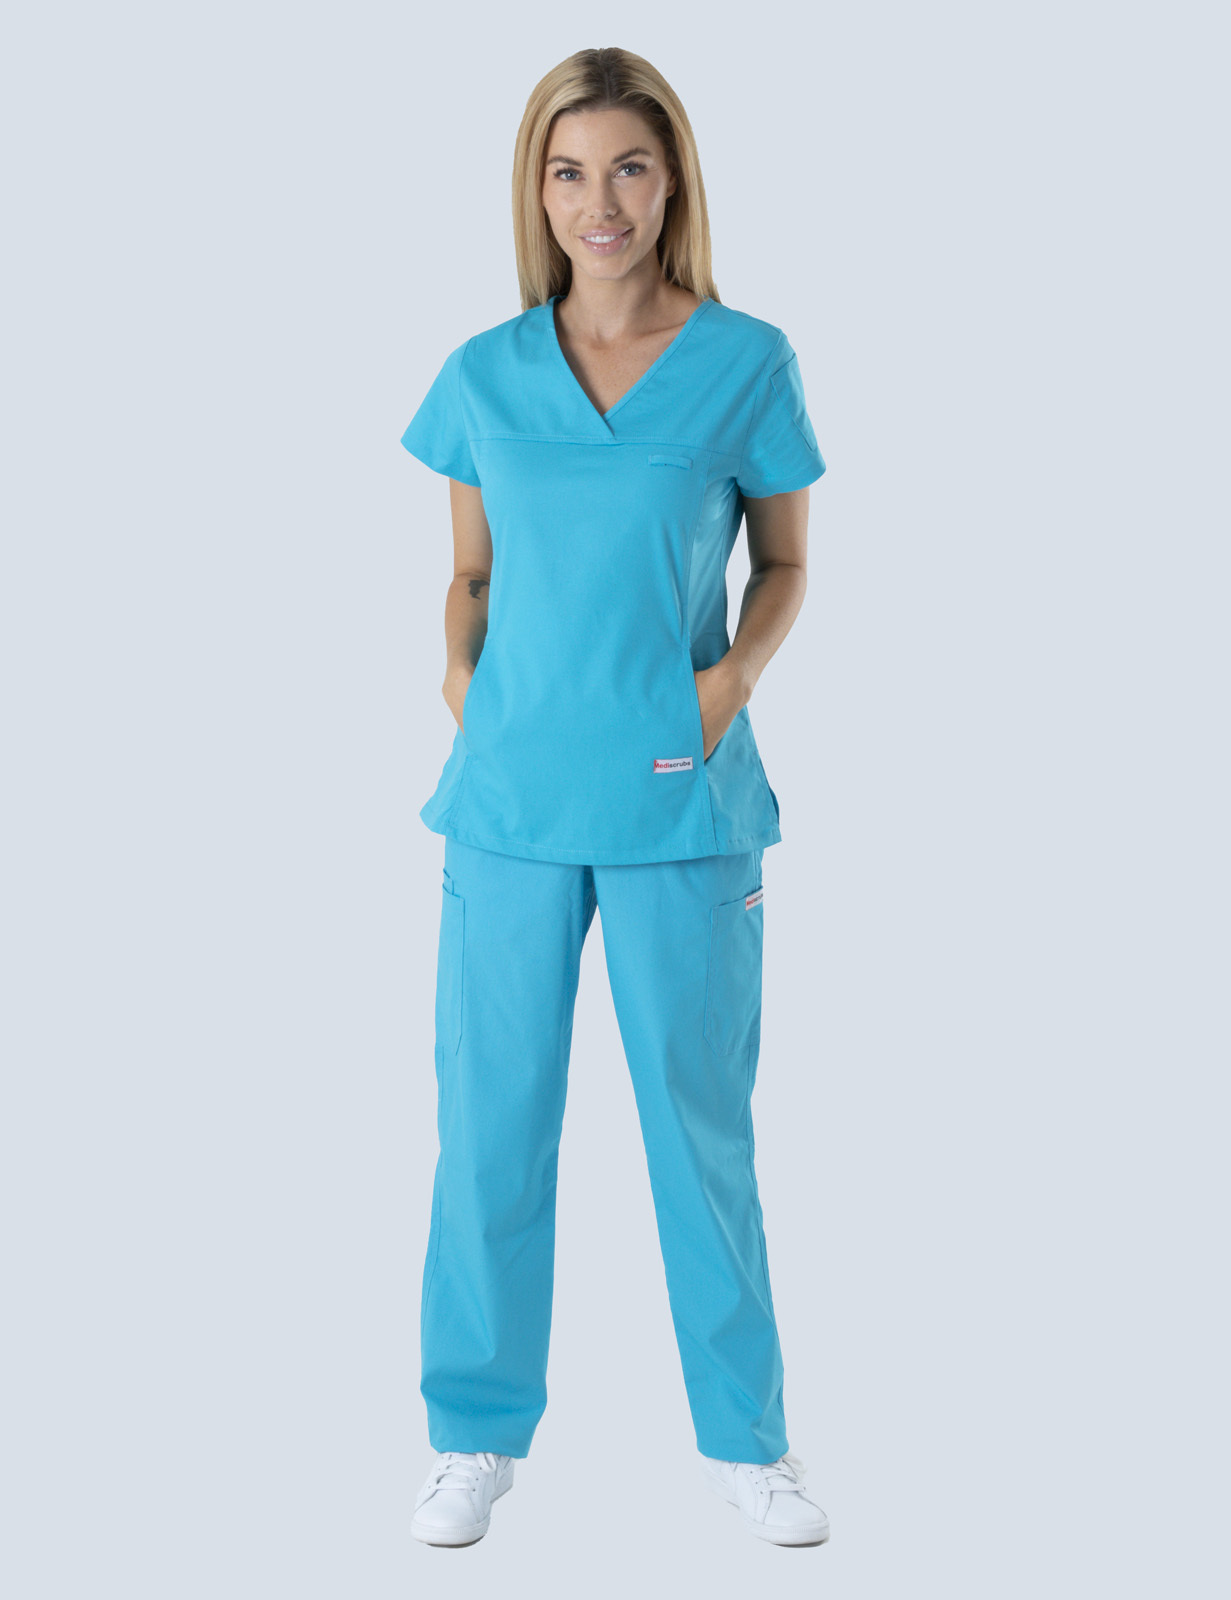 Maleny Hospital - Enrolled Nurse (Women's Fit Solid Scrub Top and Cargo Pants in Aqua incl Logos)